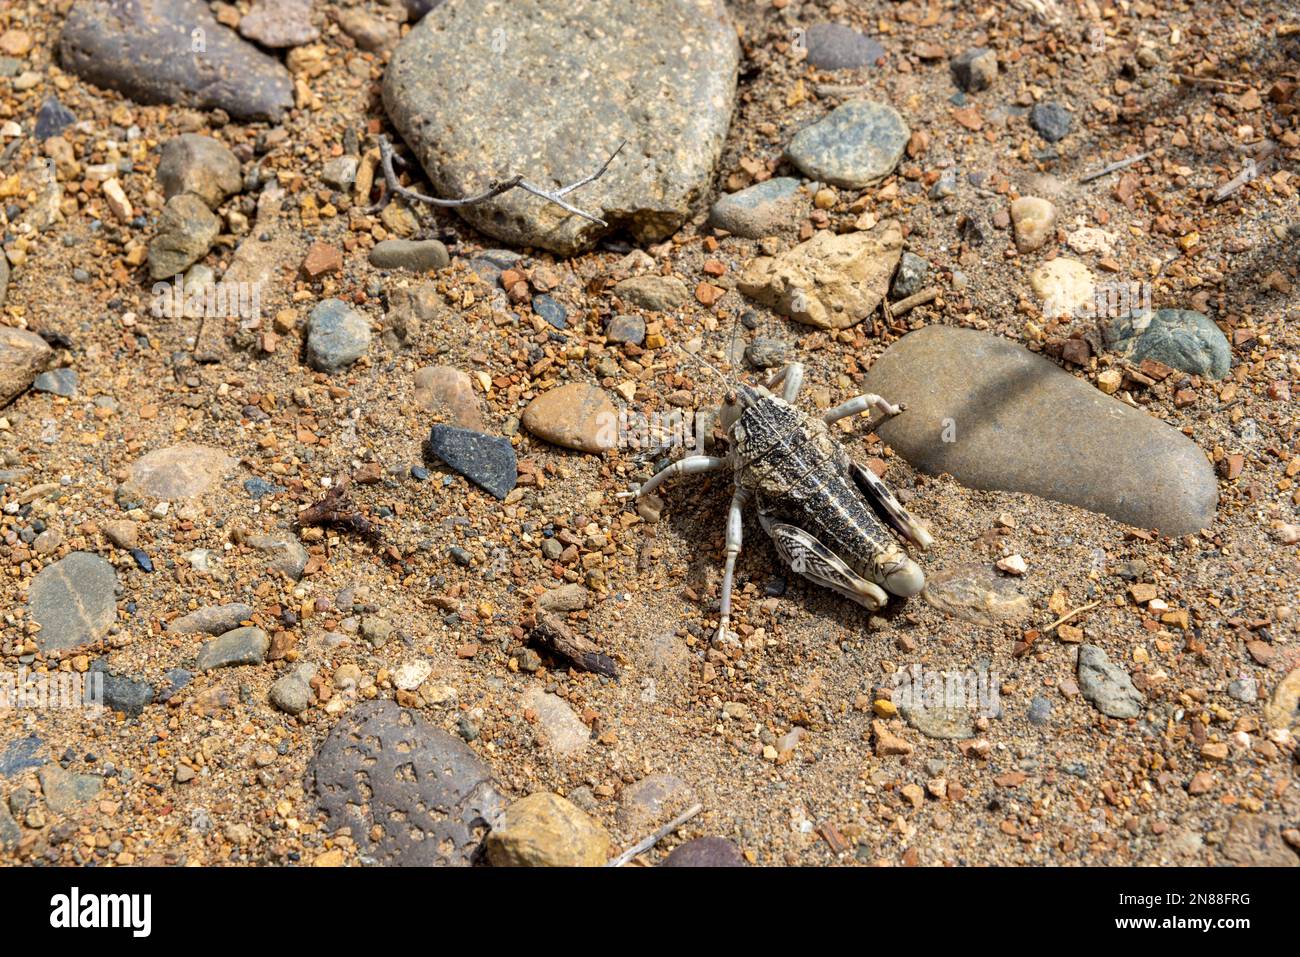 Insect in the beautiful Tierra de Colores in Parque Patagonia in Argentina, South America Stock Photo